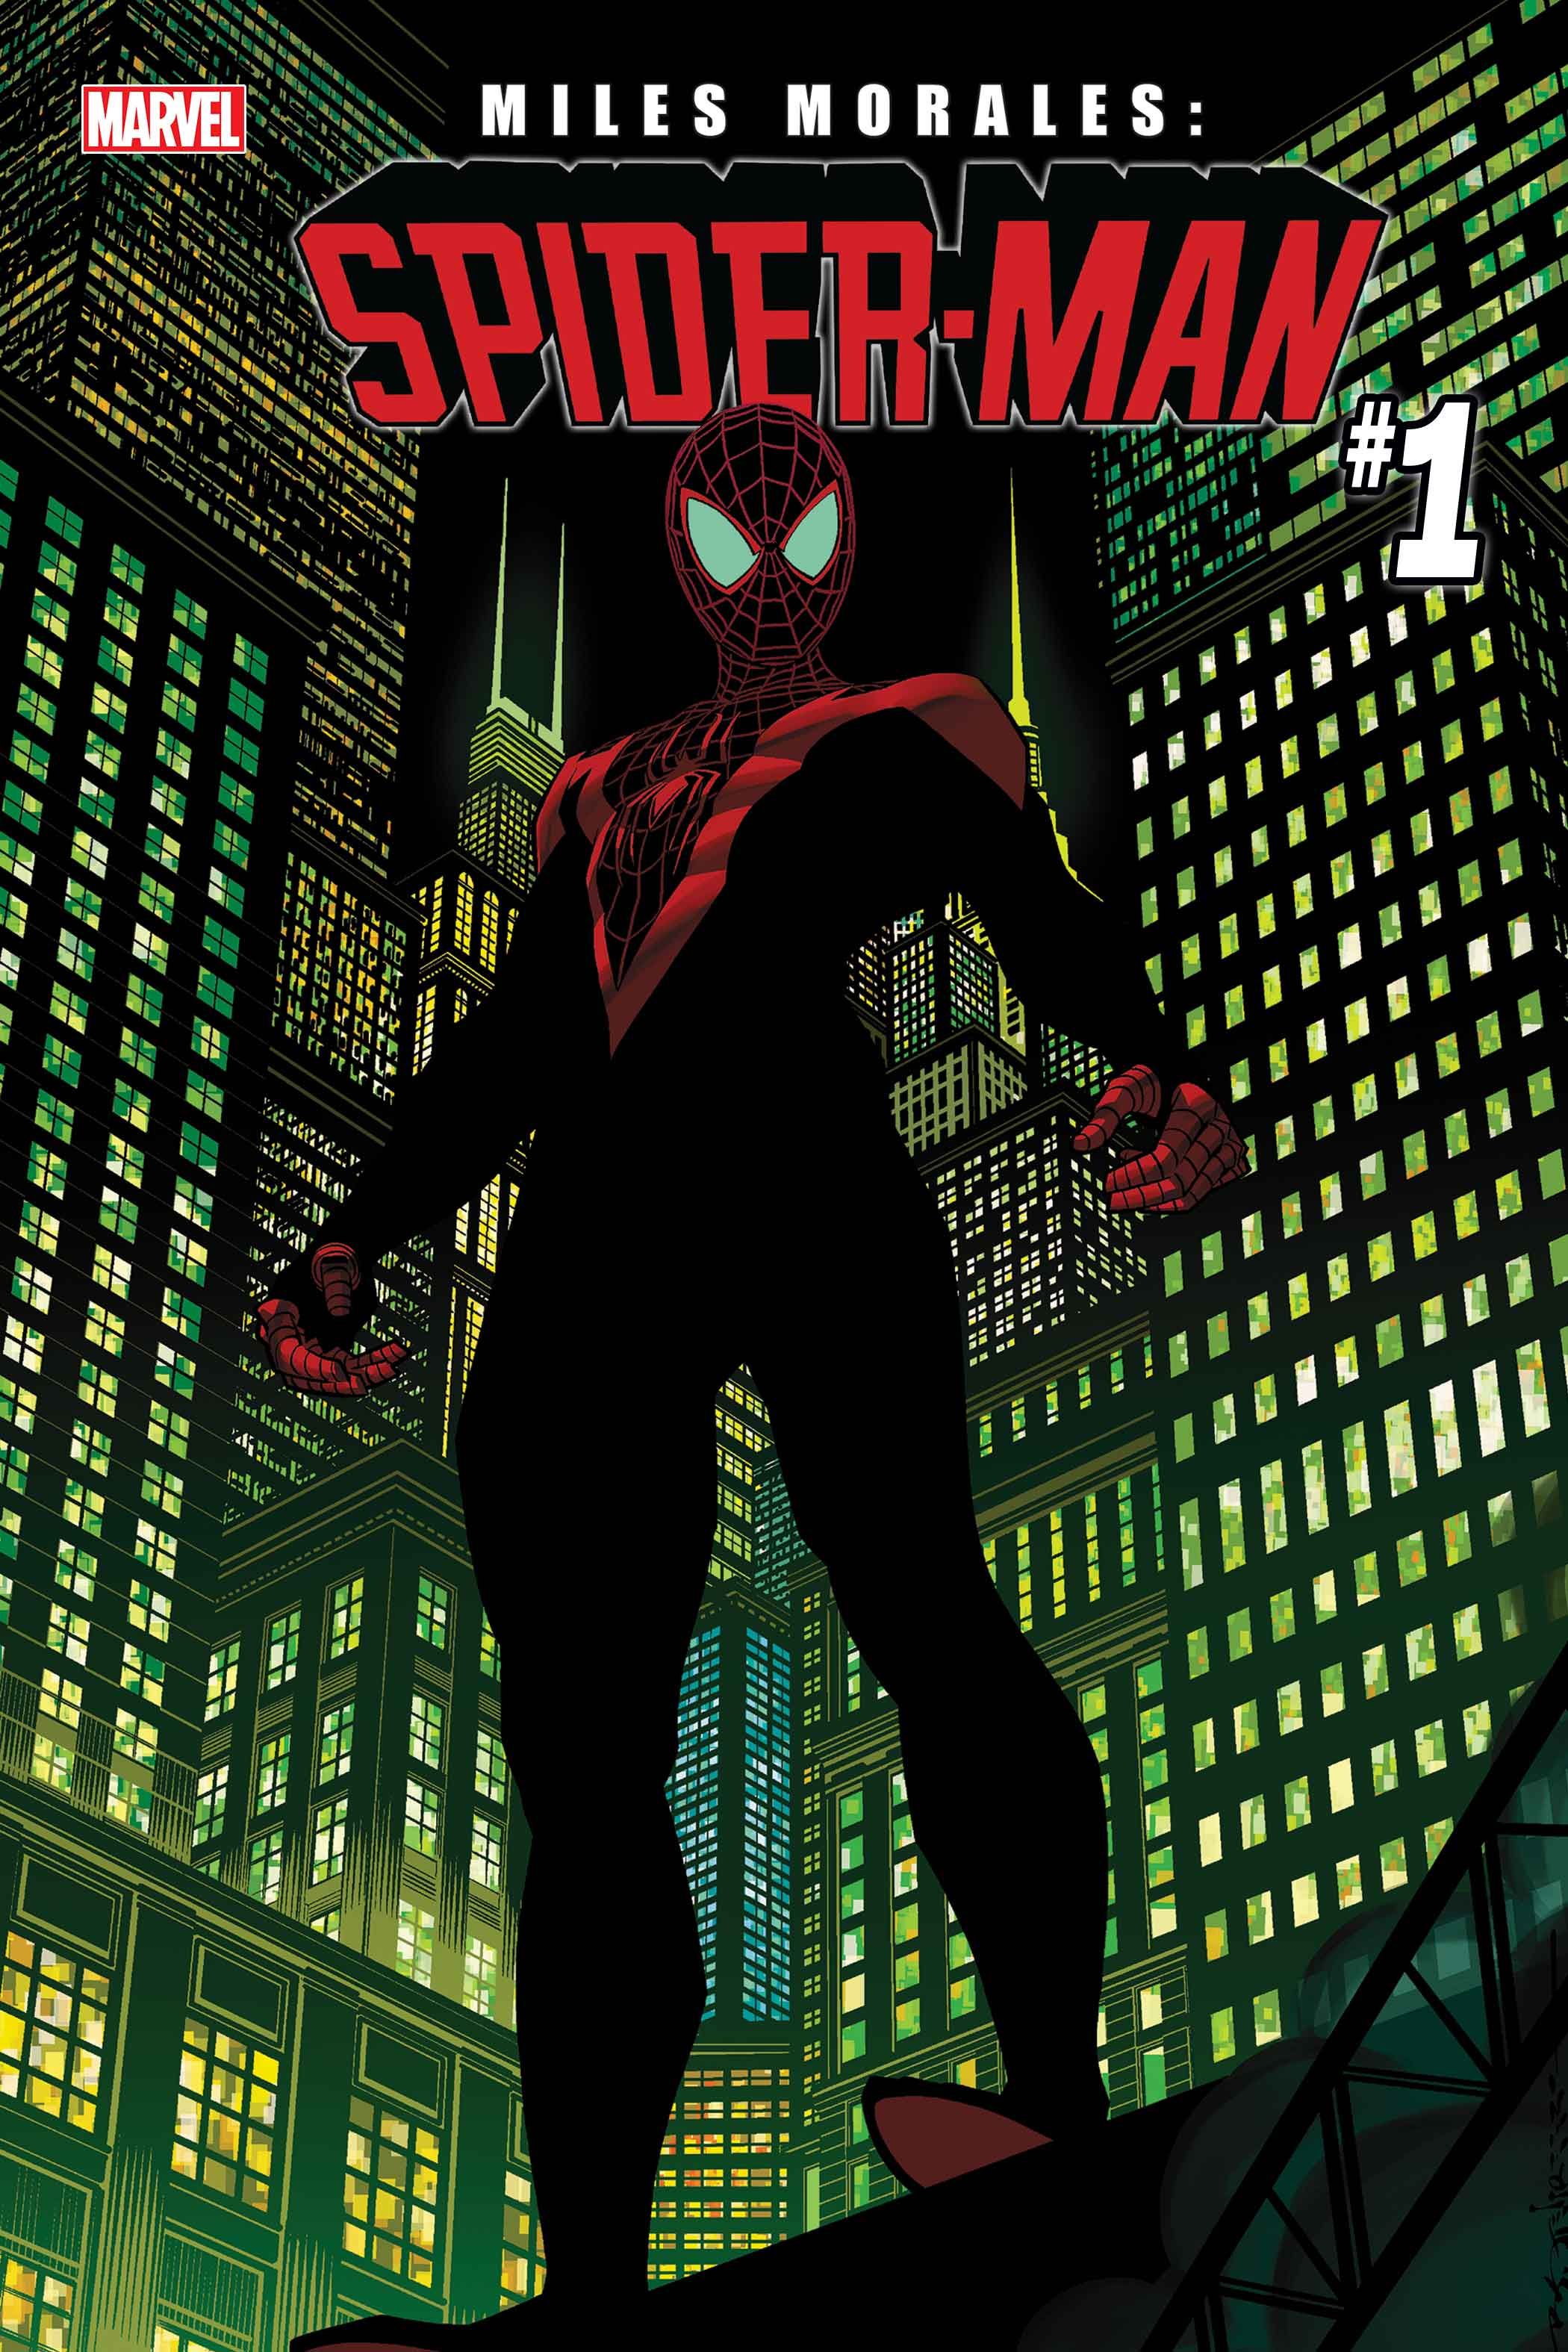 'Miles Morales: Spider-Man' #1 Captures the Heart & Legacy of Marvel's